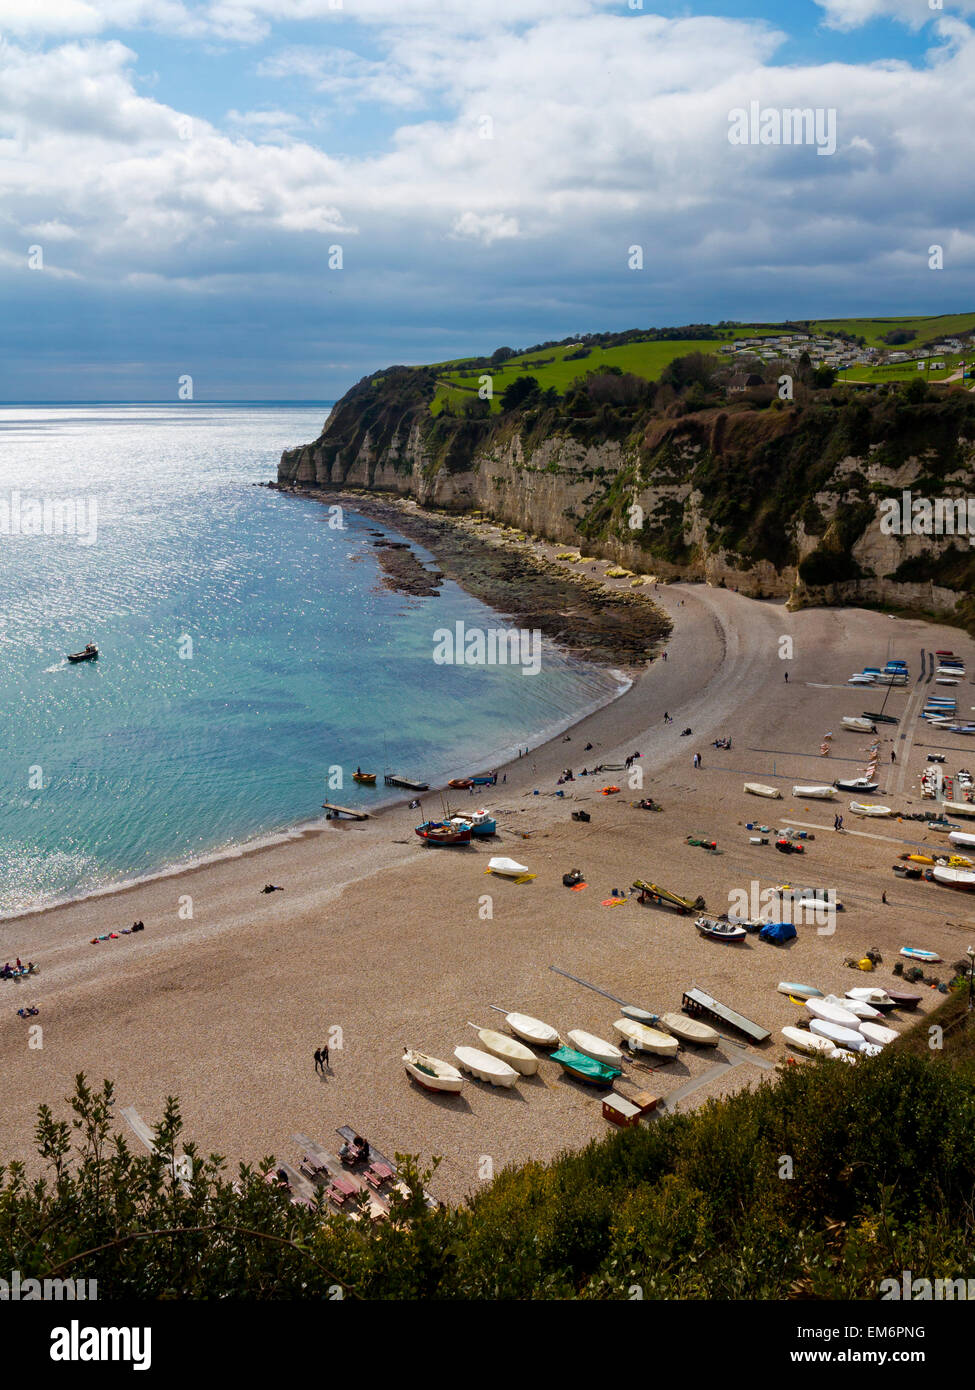 View looking down on the beach at Beer a small seaside resort on the south Devon coast England UK Stock Photo